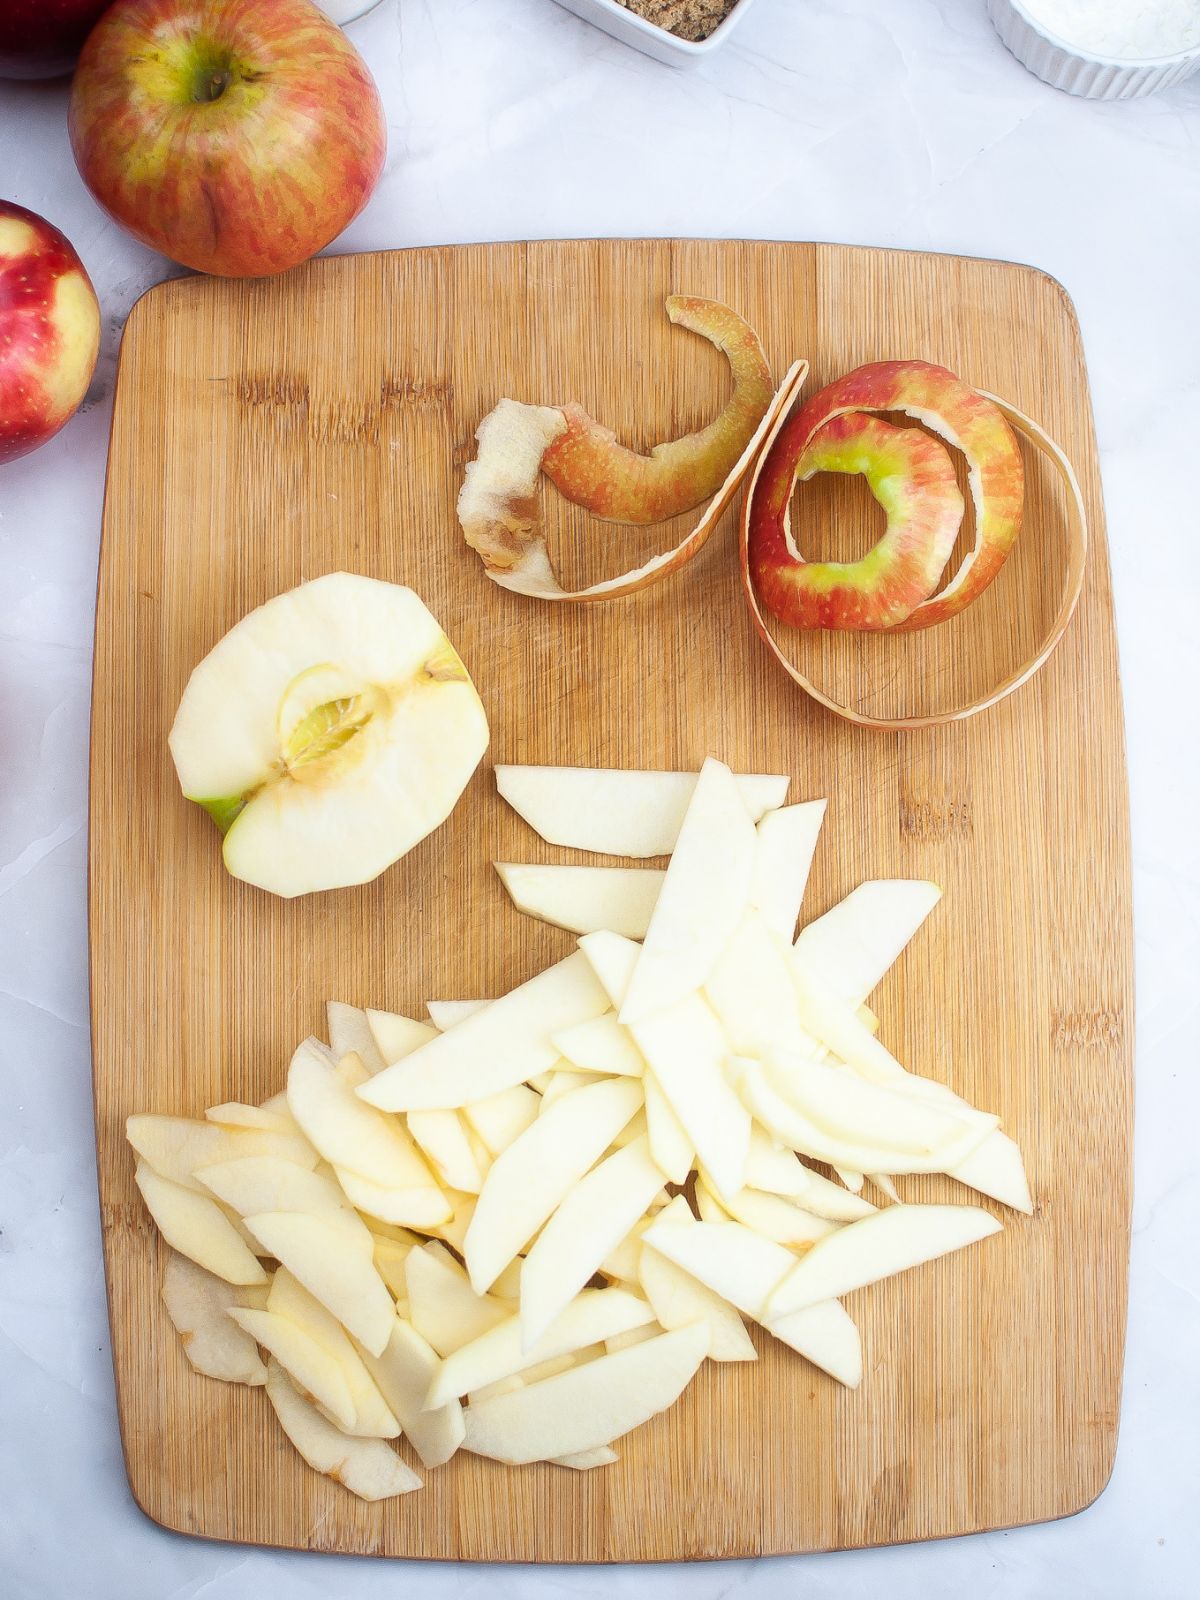 apple slices on cutting board.